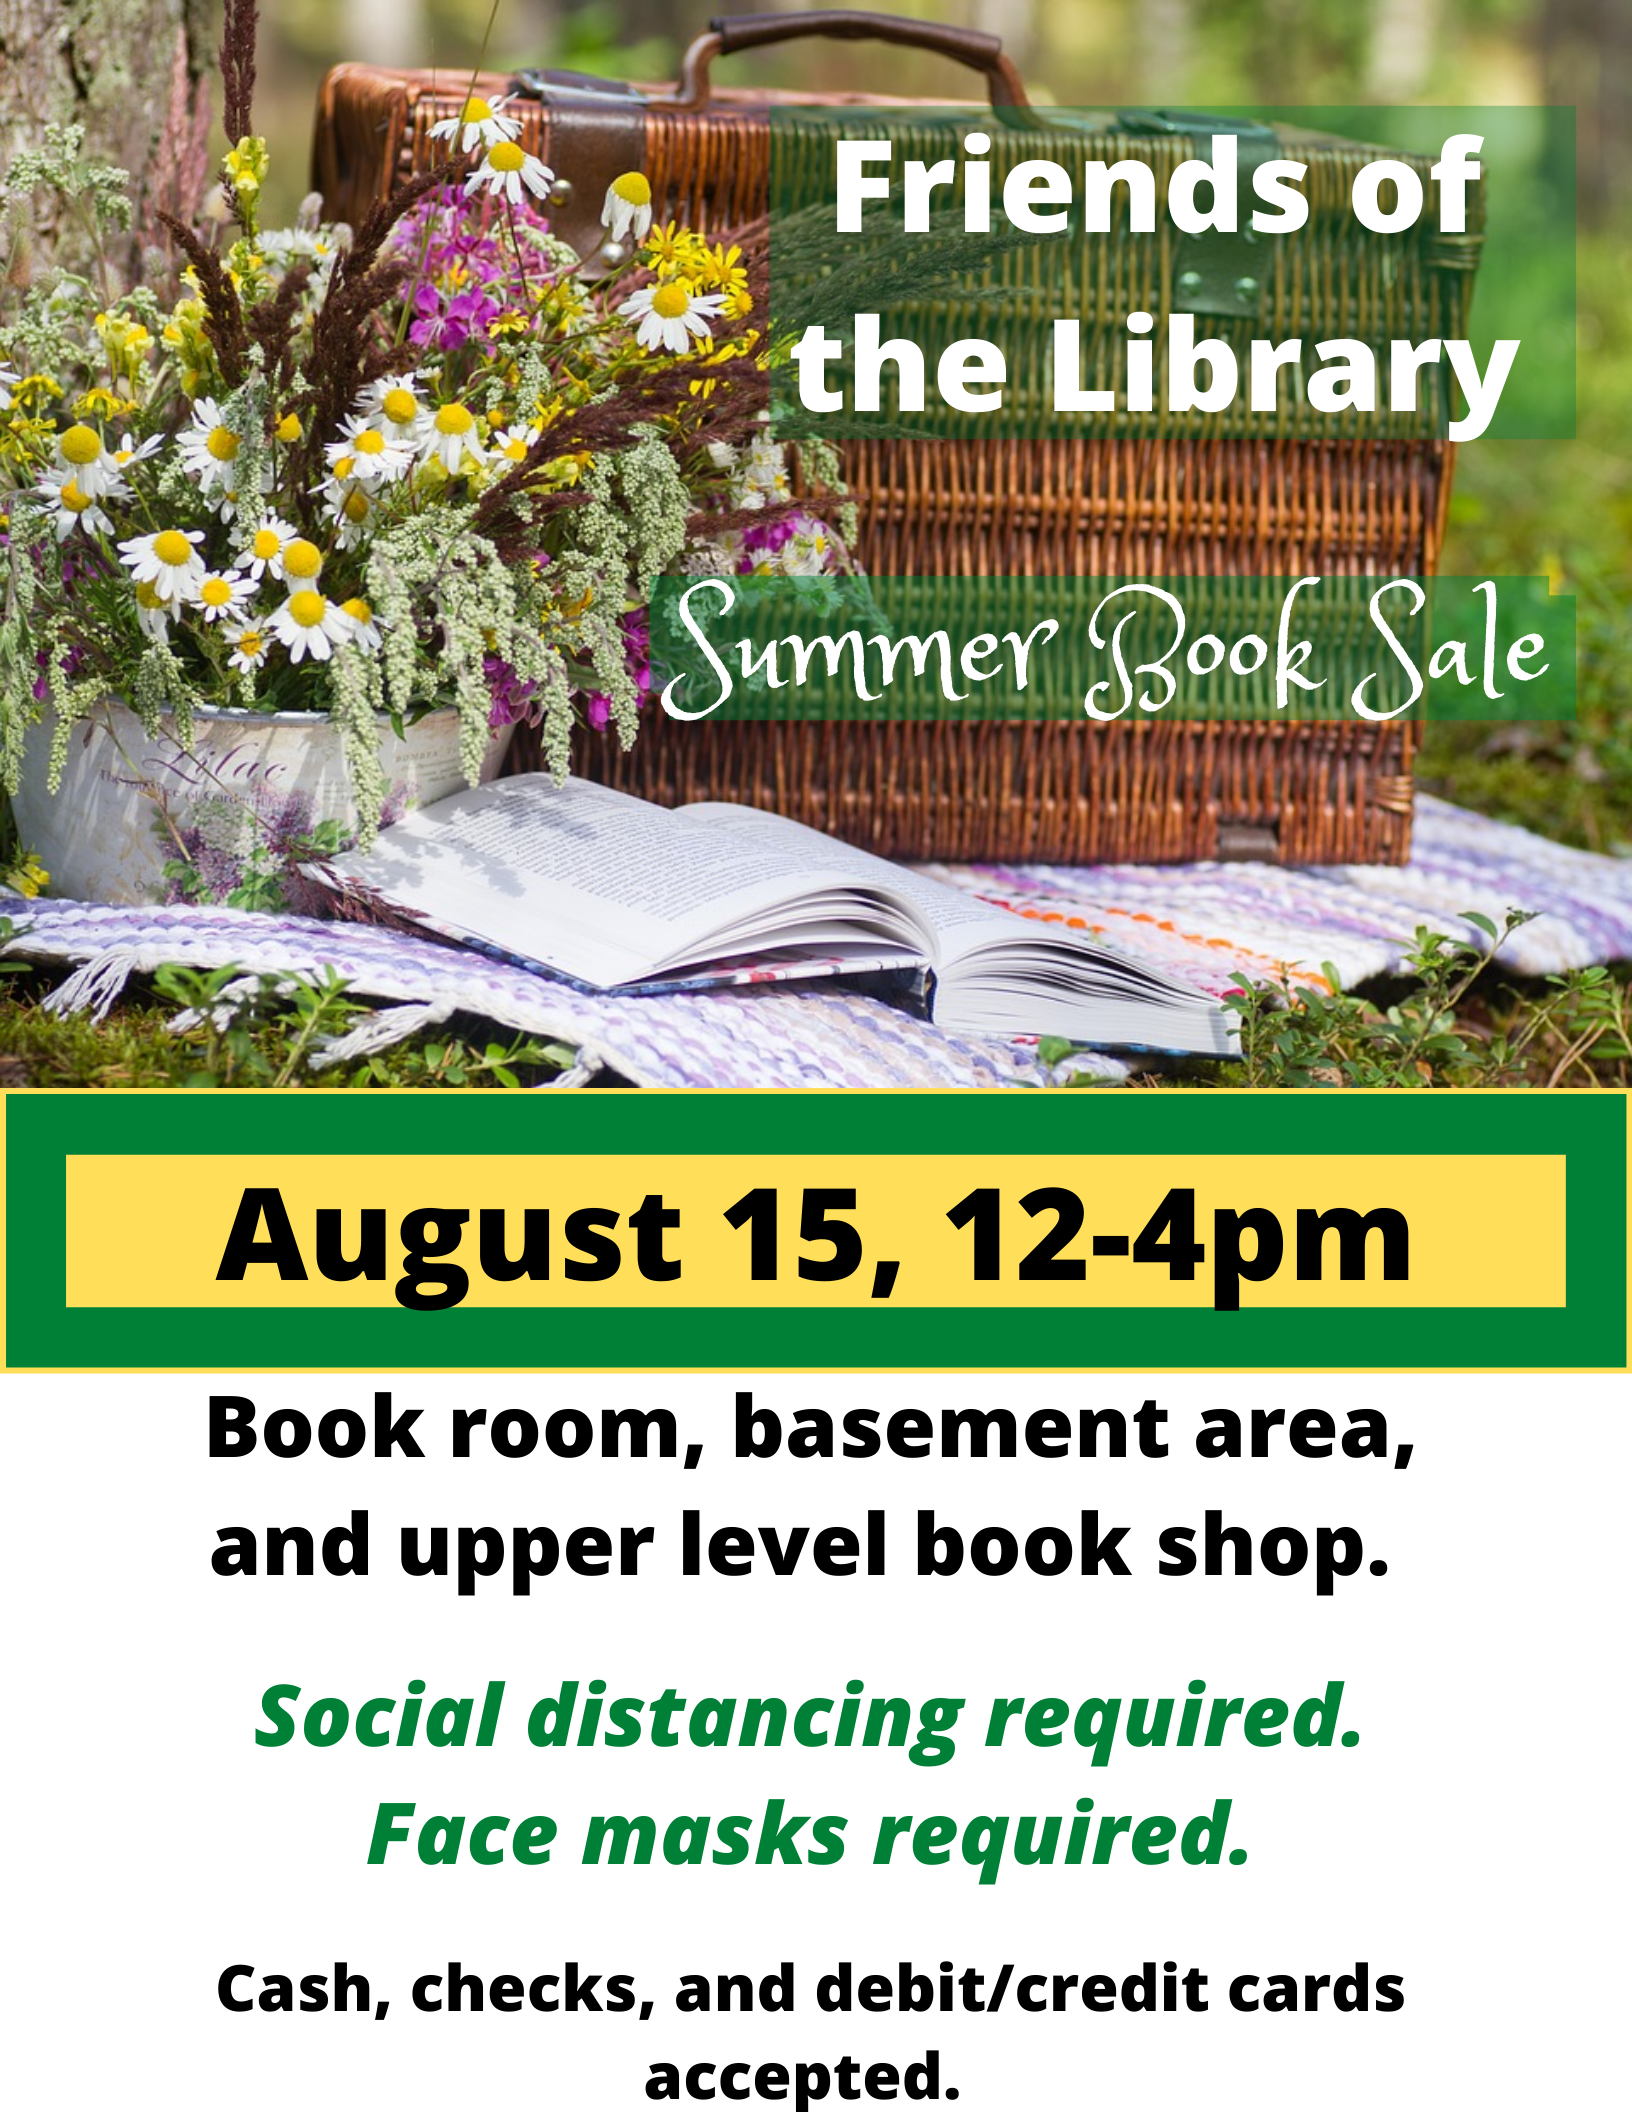 Friends of the Library Summer Book Sale